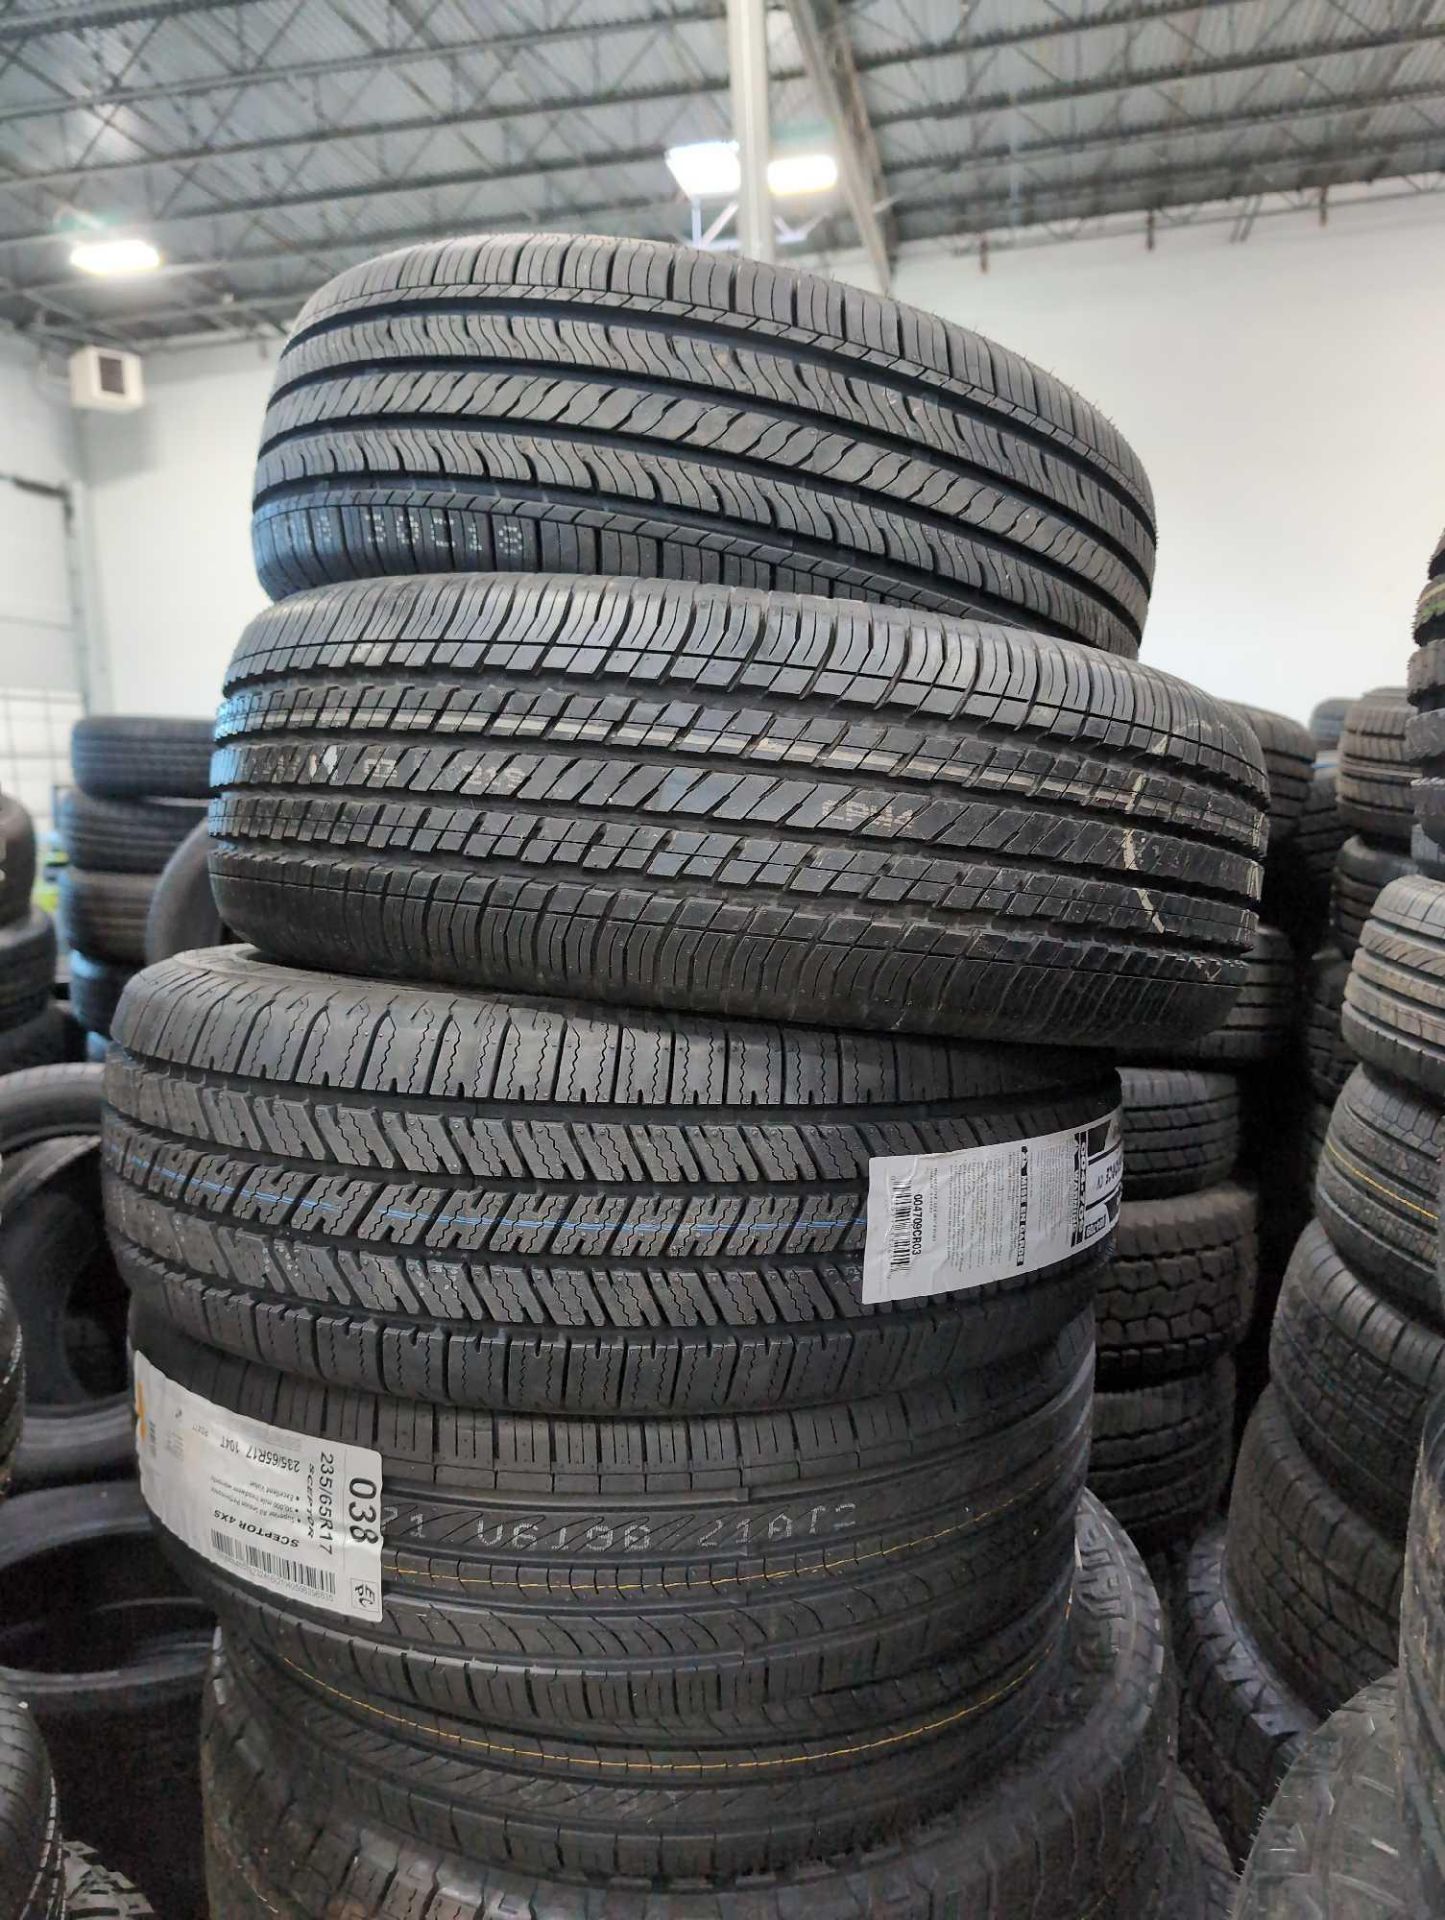 Approx 300 Tires - Image 13 of 48